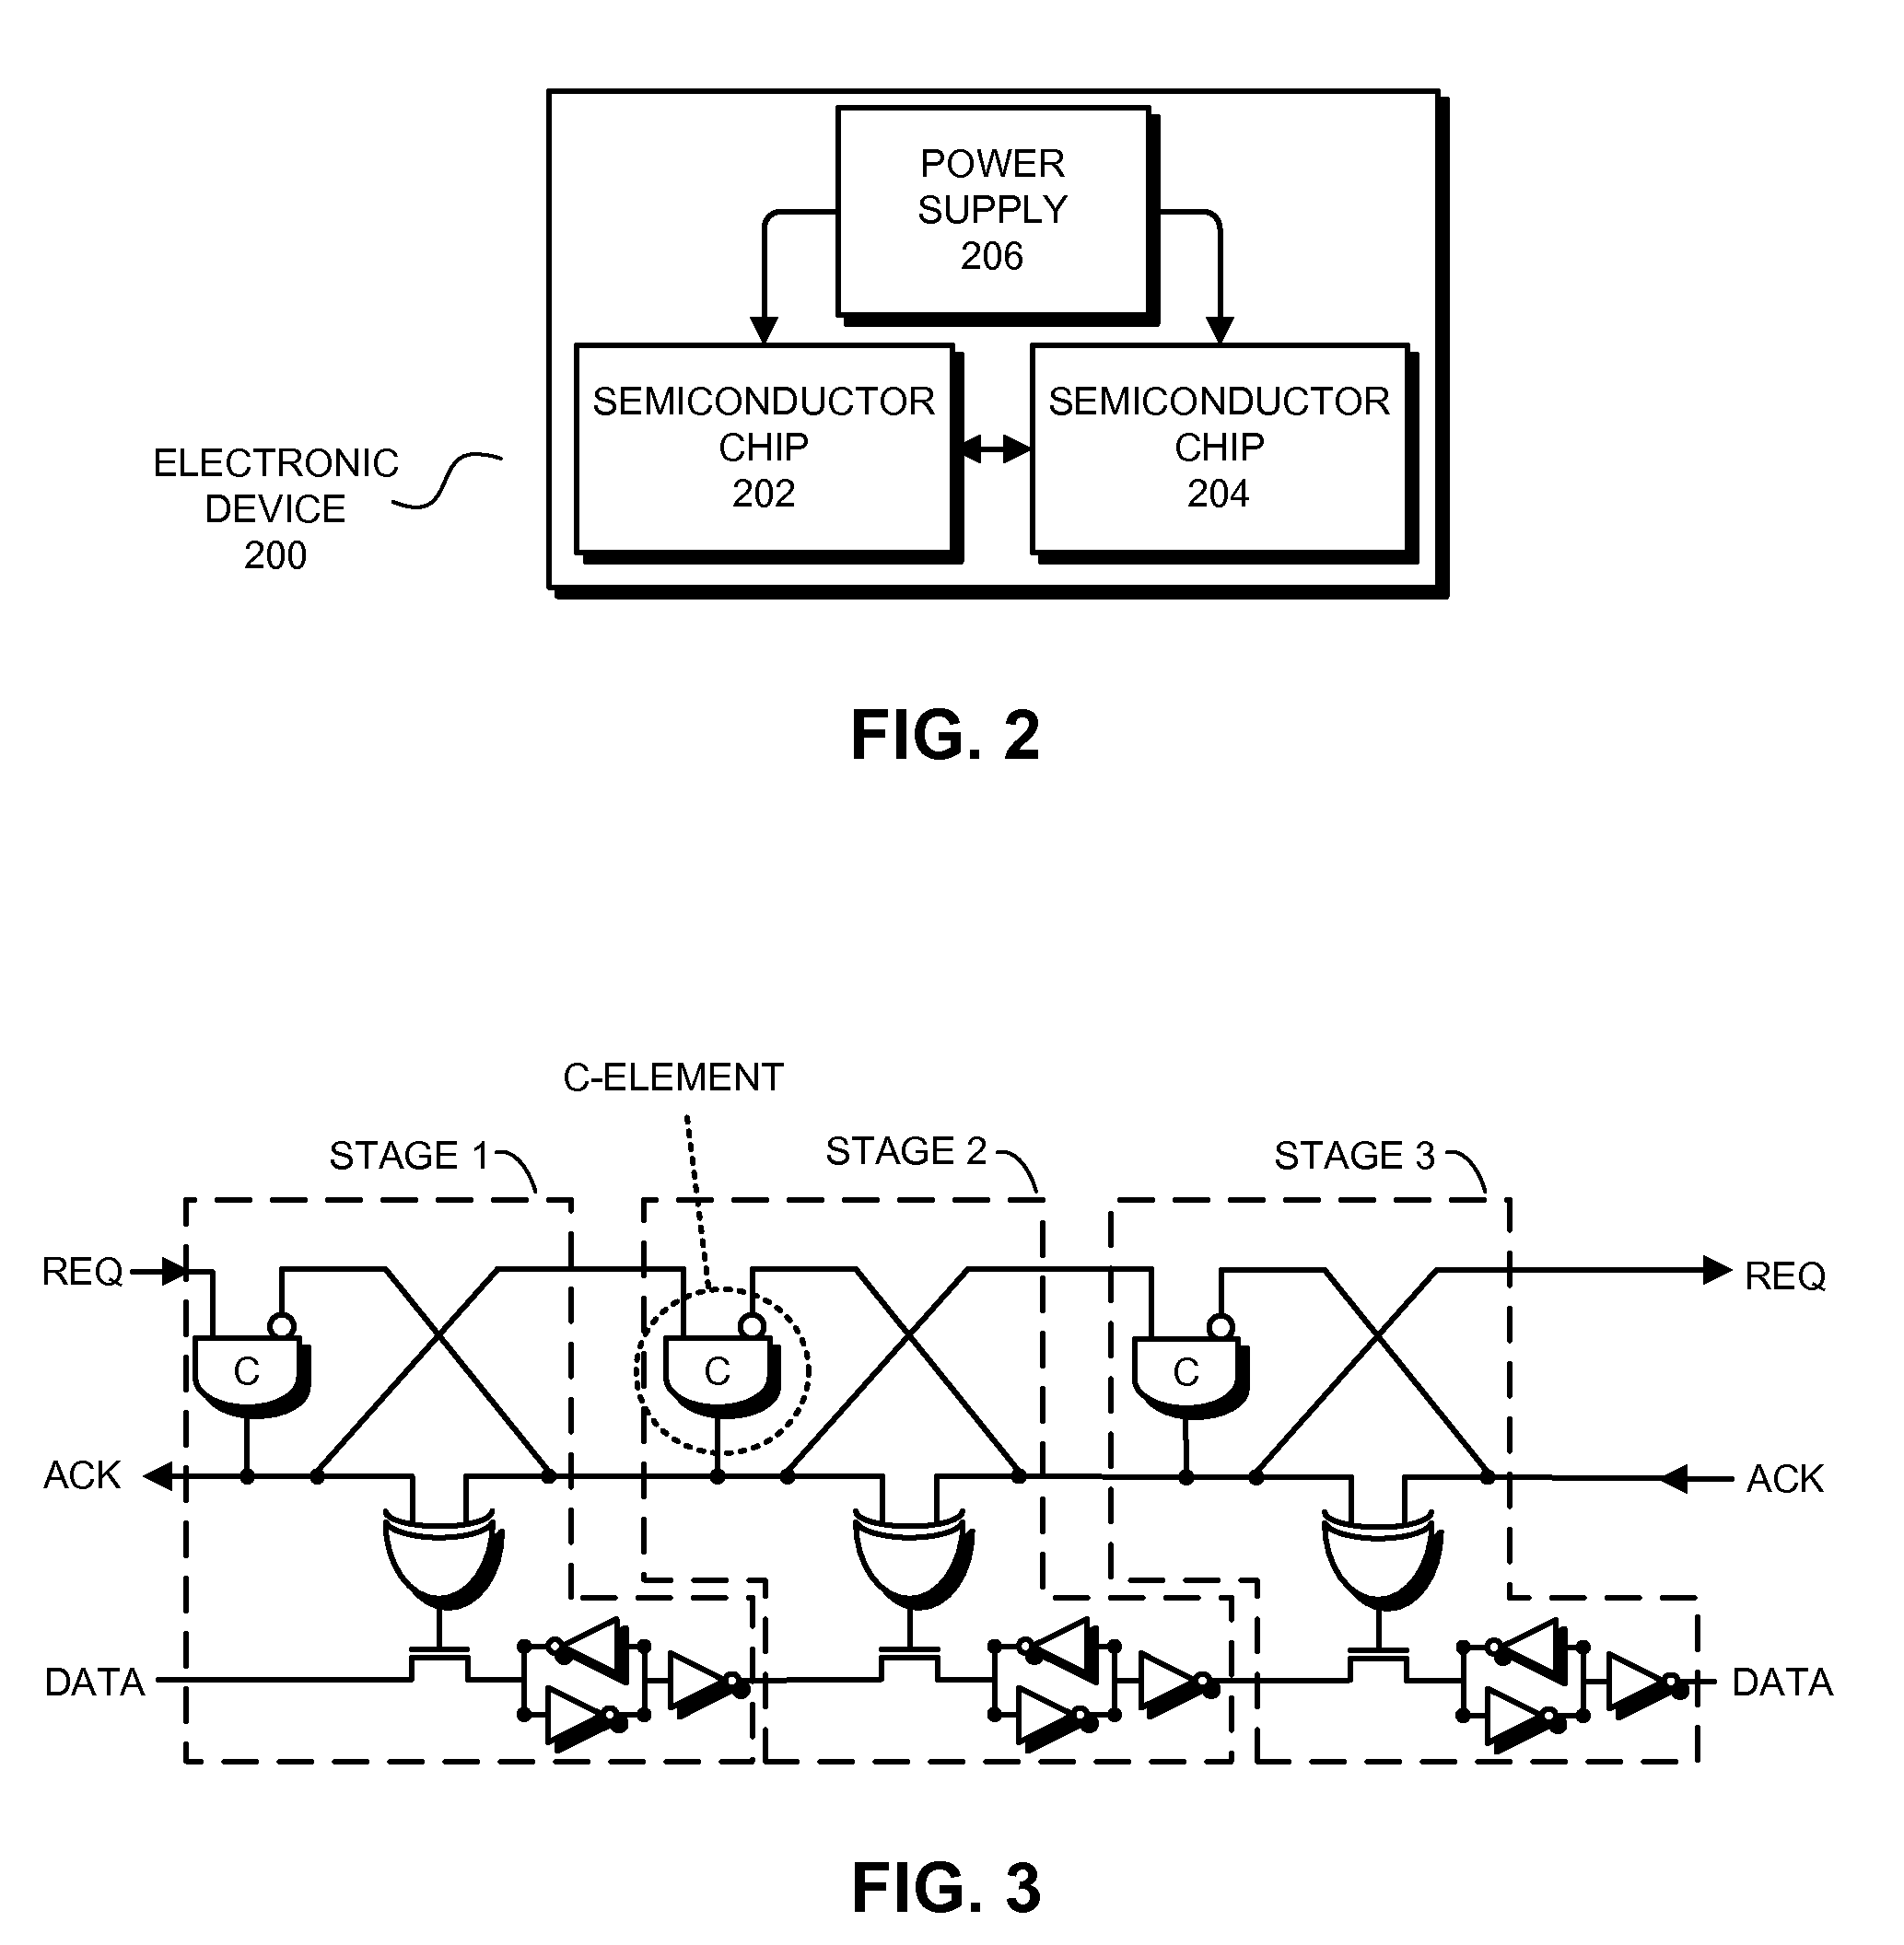 Communicating signals between semiconductor chips using round-robin-coupled micropipelines